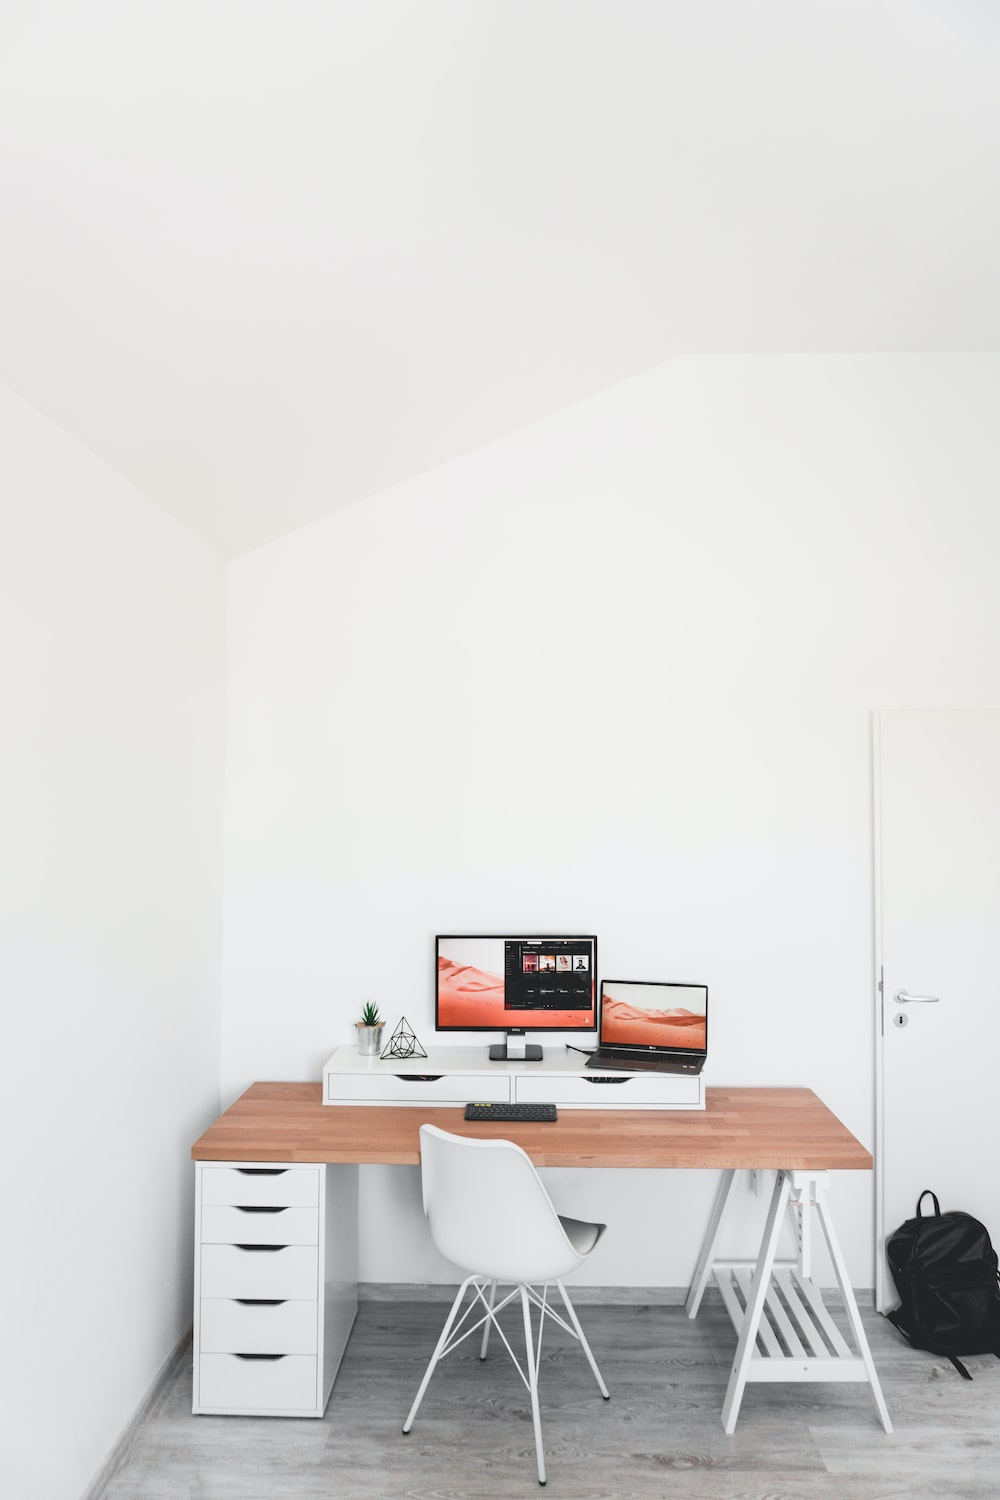 Where should a desk be placed in an office?